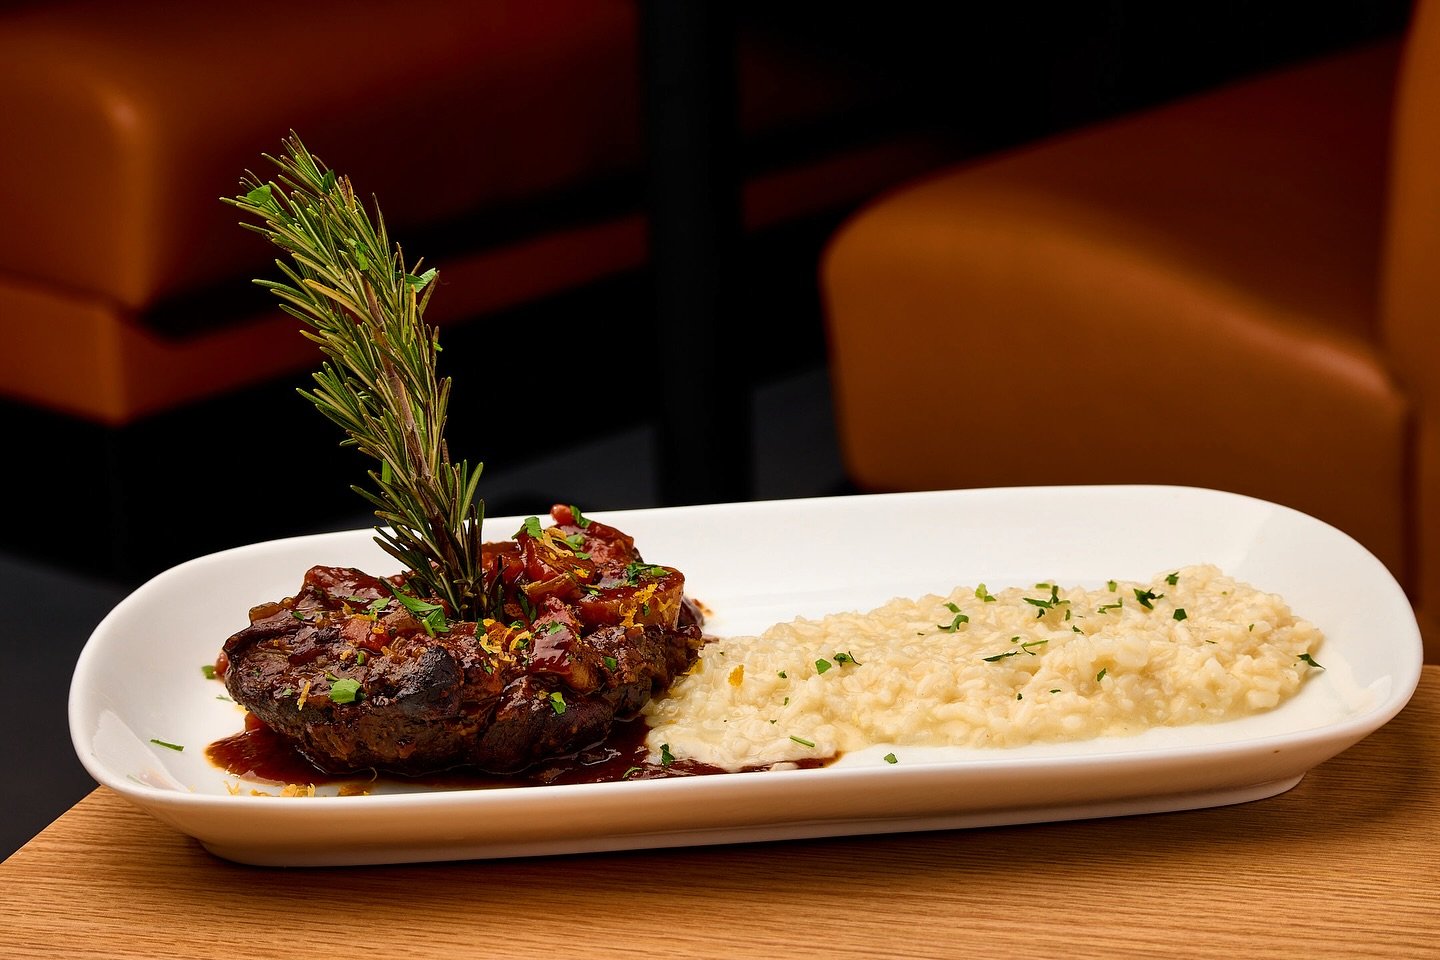 Barolo Braised Veal Osso Buco with Risotto! 
The tender, melt-in-your-mouth veal, simmered in rich Barolo wine, will transport your taste buds to new heights of gastronomic delight. 🌟🍷 Experience the epitome of Italian flavors and let your palate r